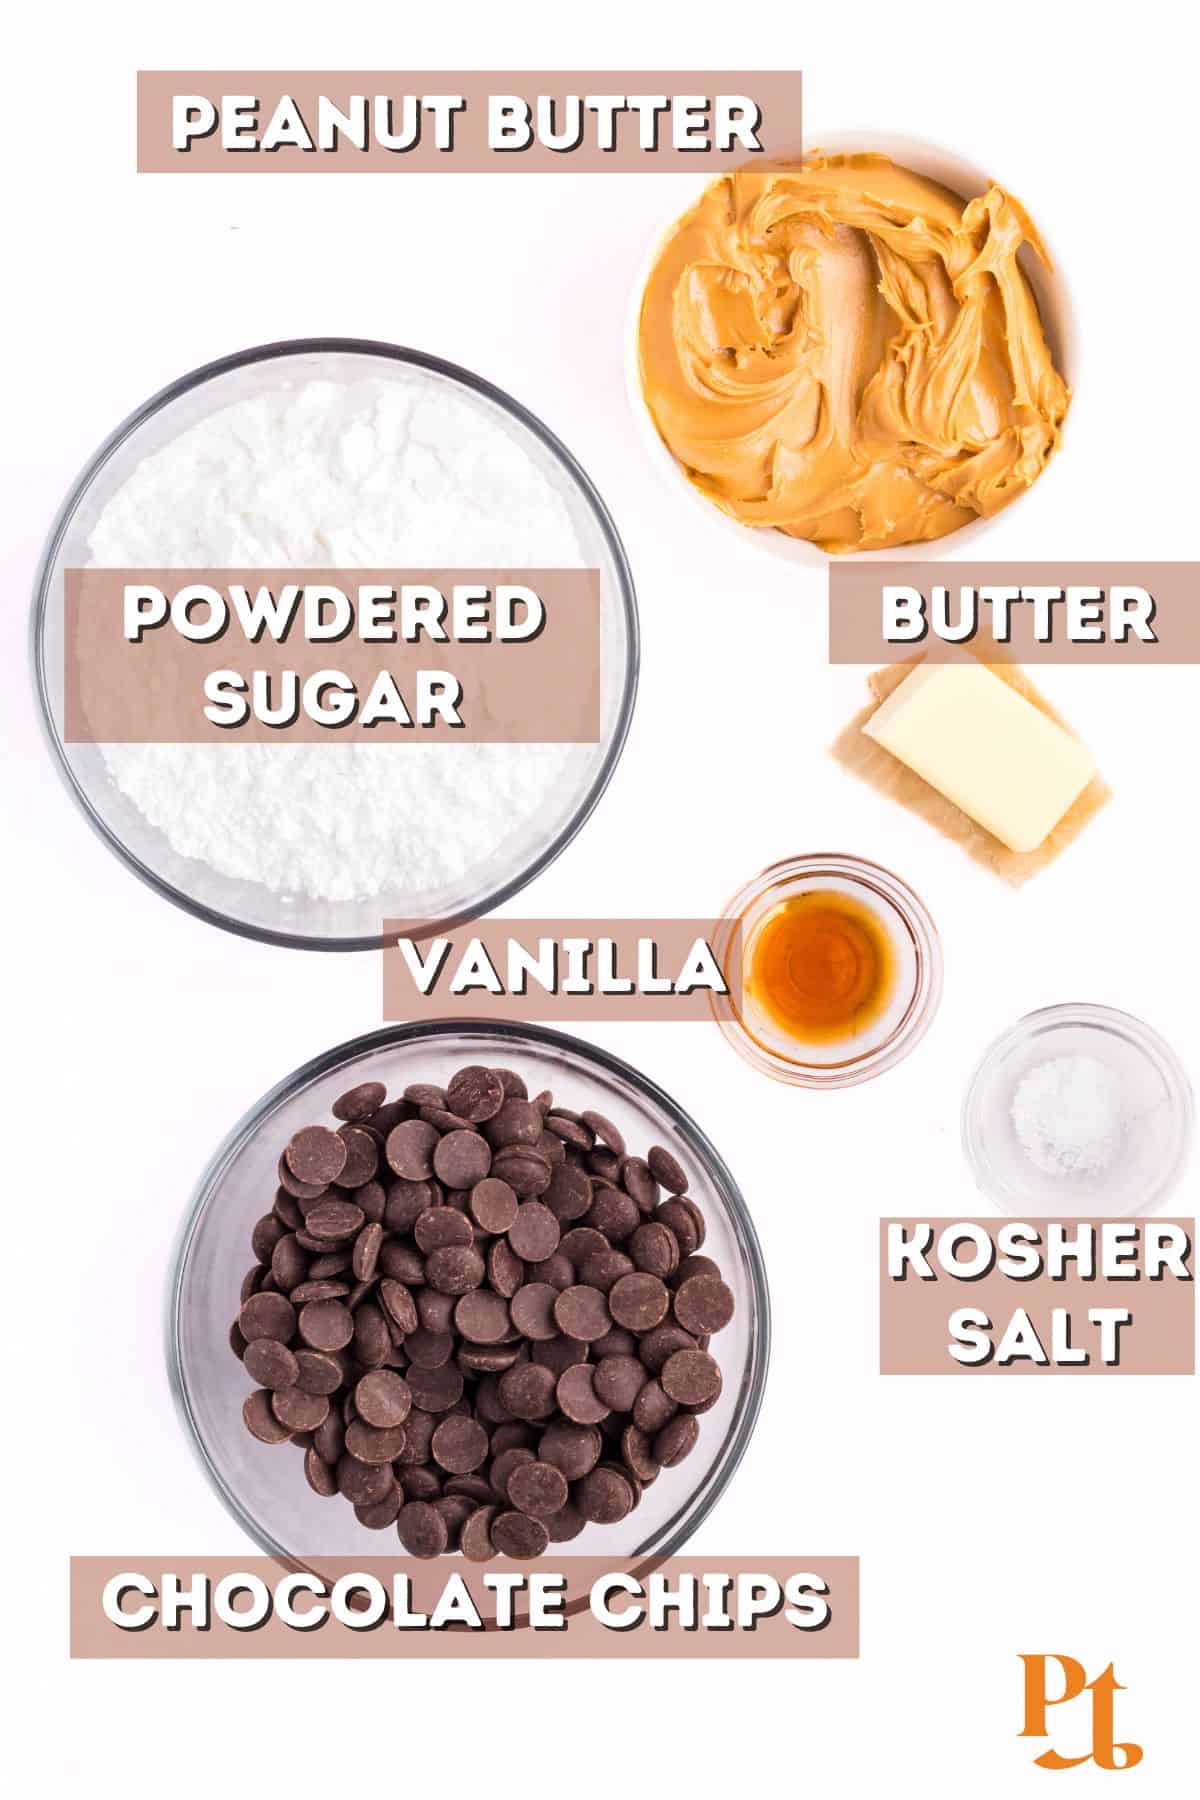 Peanut butter and other ingredients for chocolate truffles.